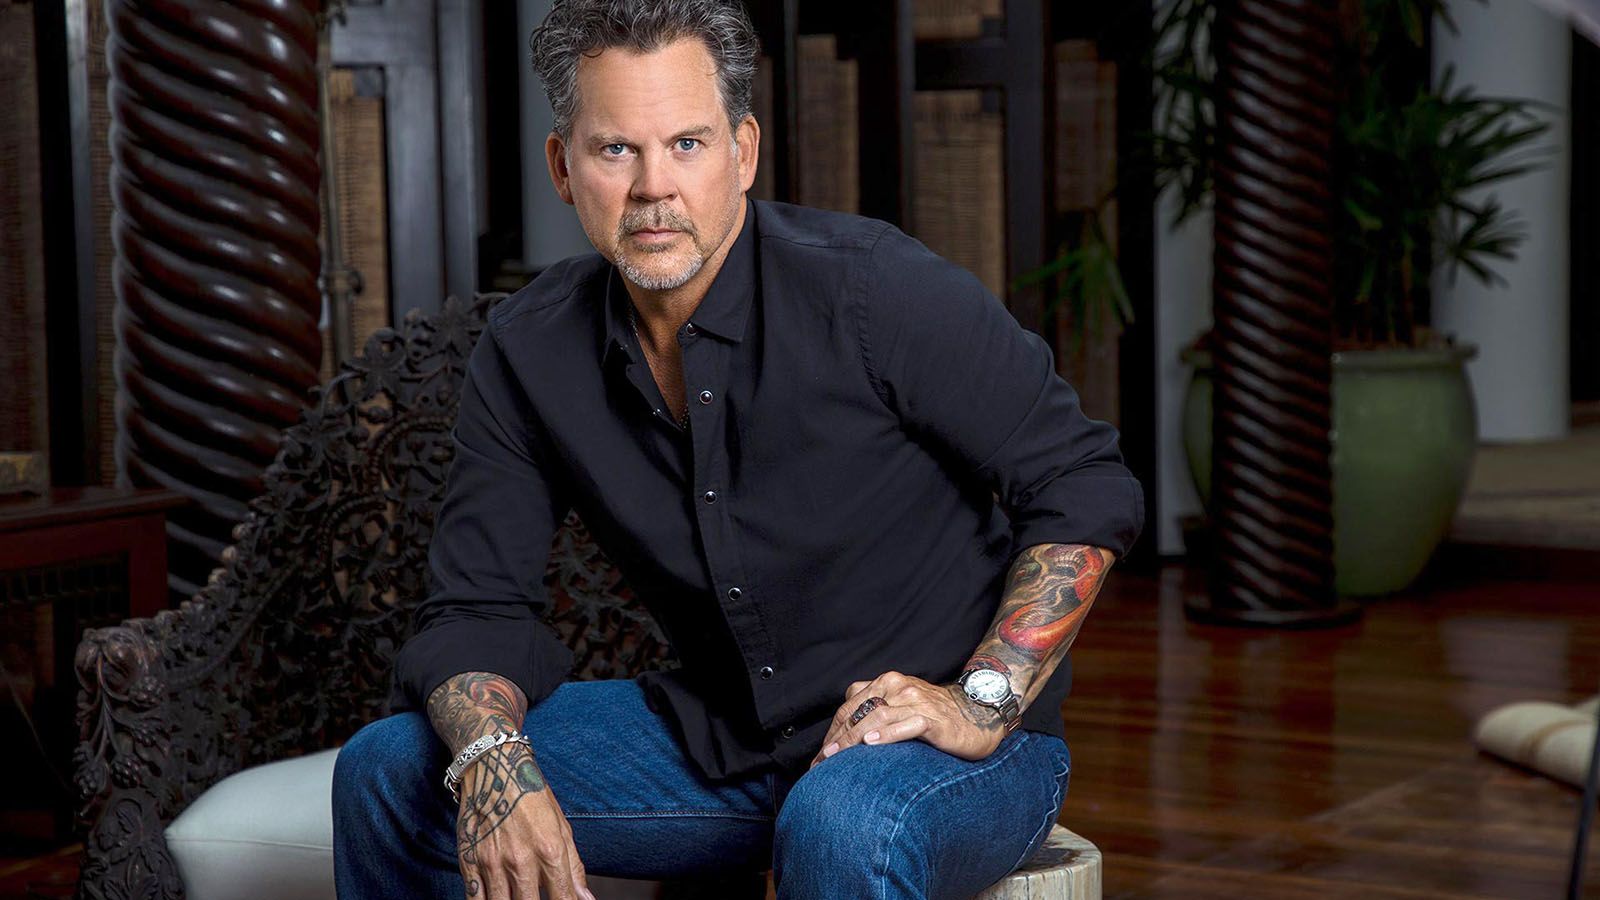 Gary Allan will be at The Clyde Theatre on Feb. 9.